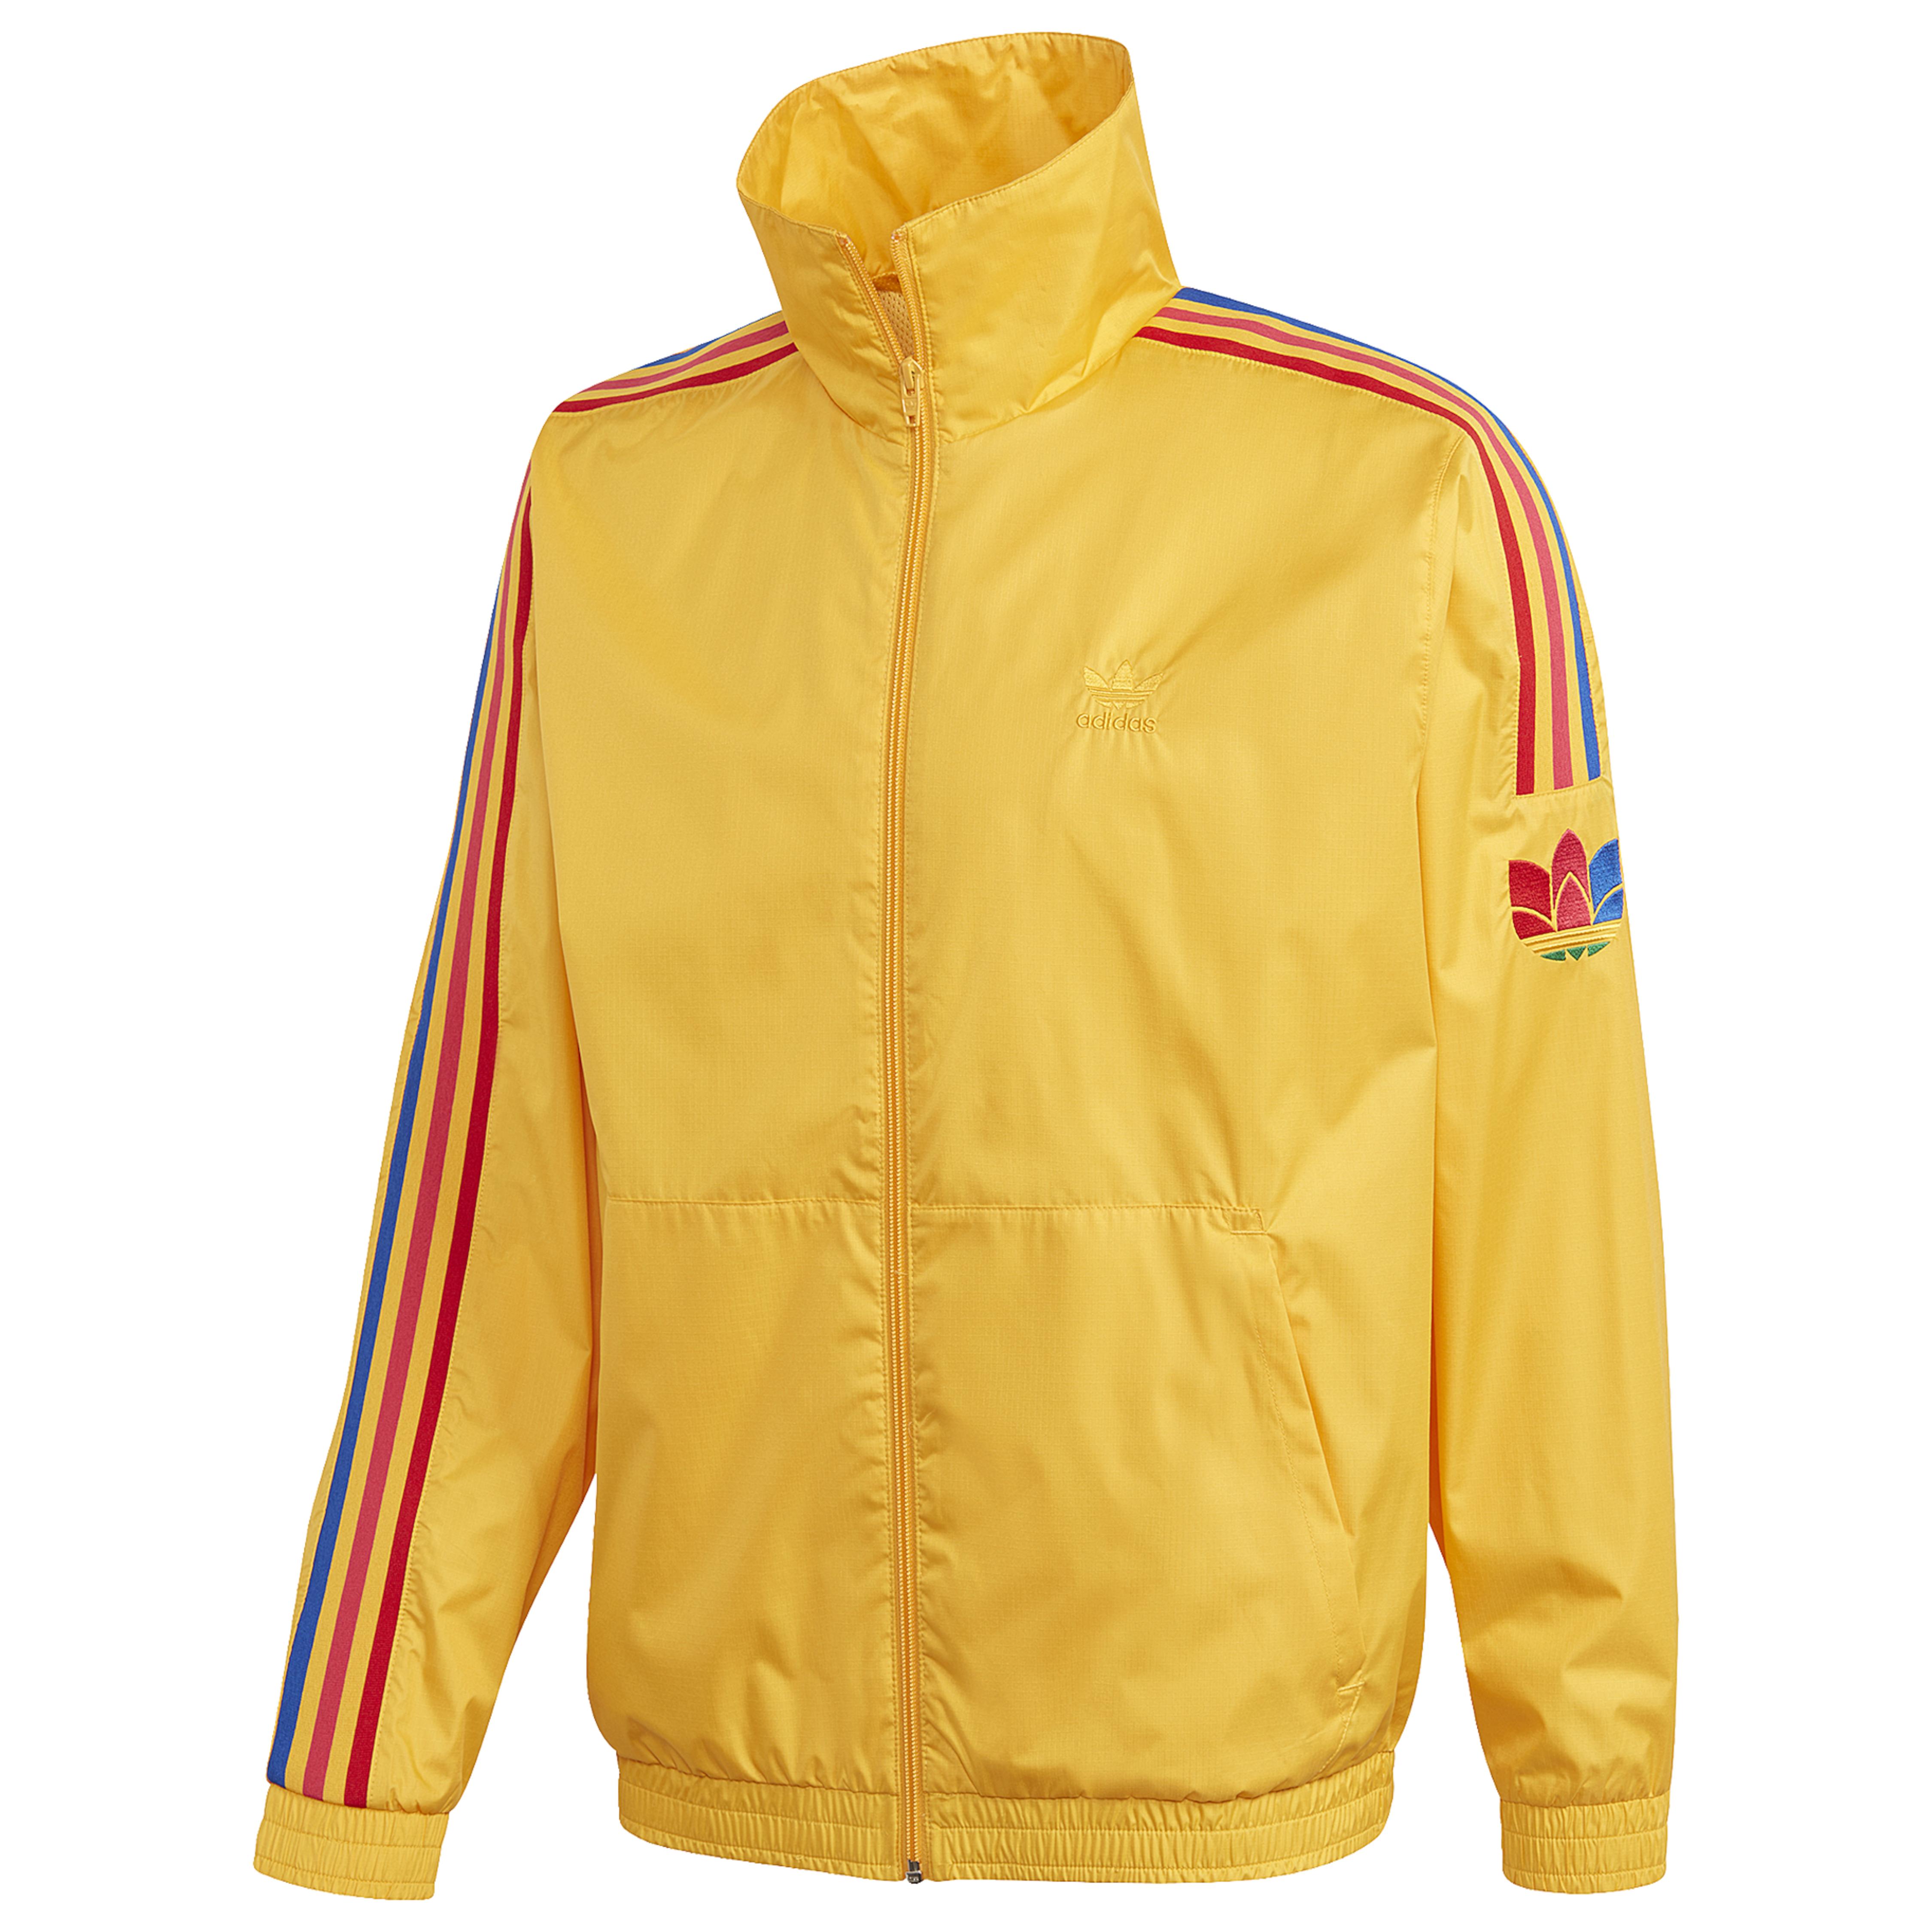 adidas Originals Synthetic 3d Trefoil Track Jacket in Yellow for Men - Lyst